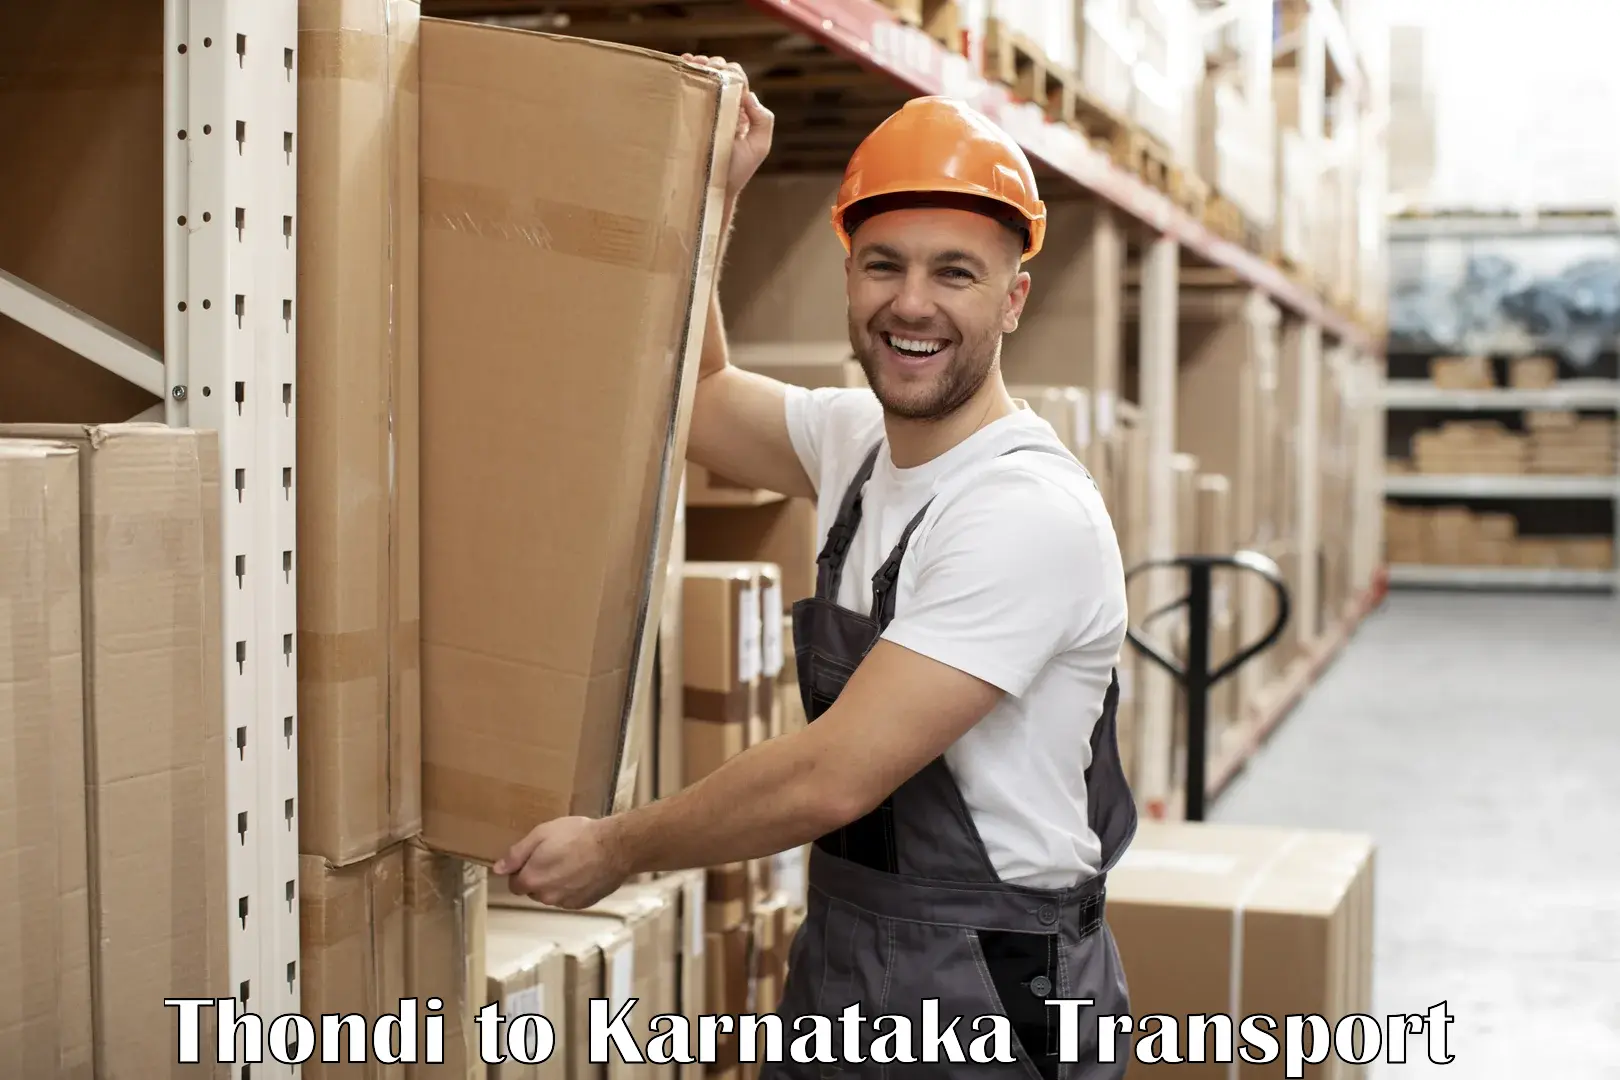 Part load transport service in India Thondi to Bangalore